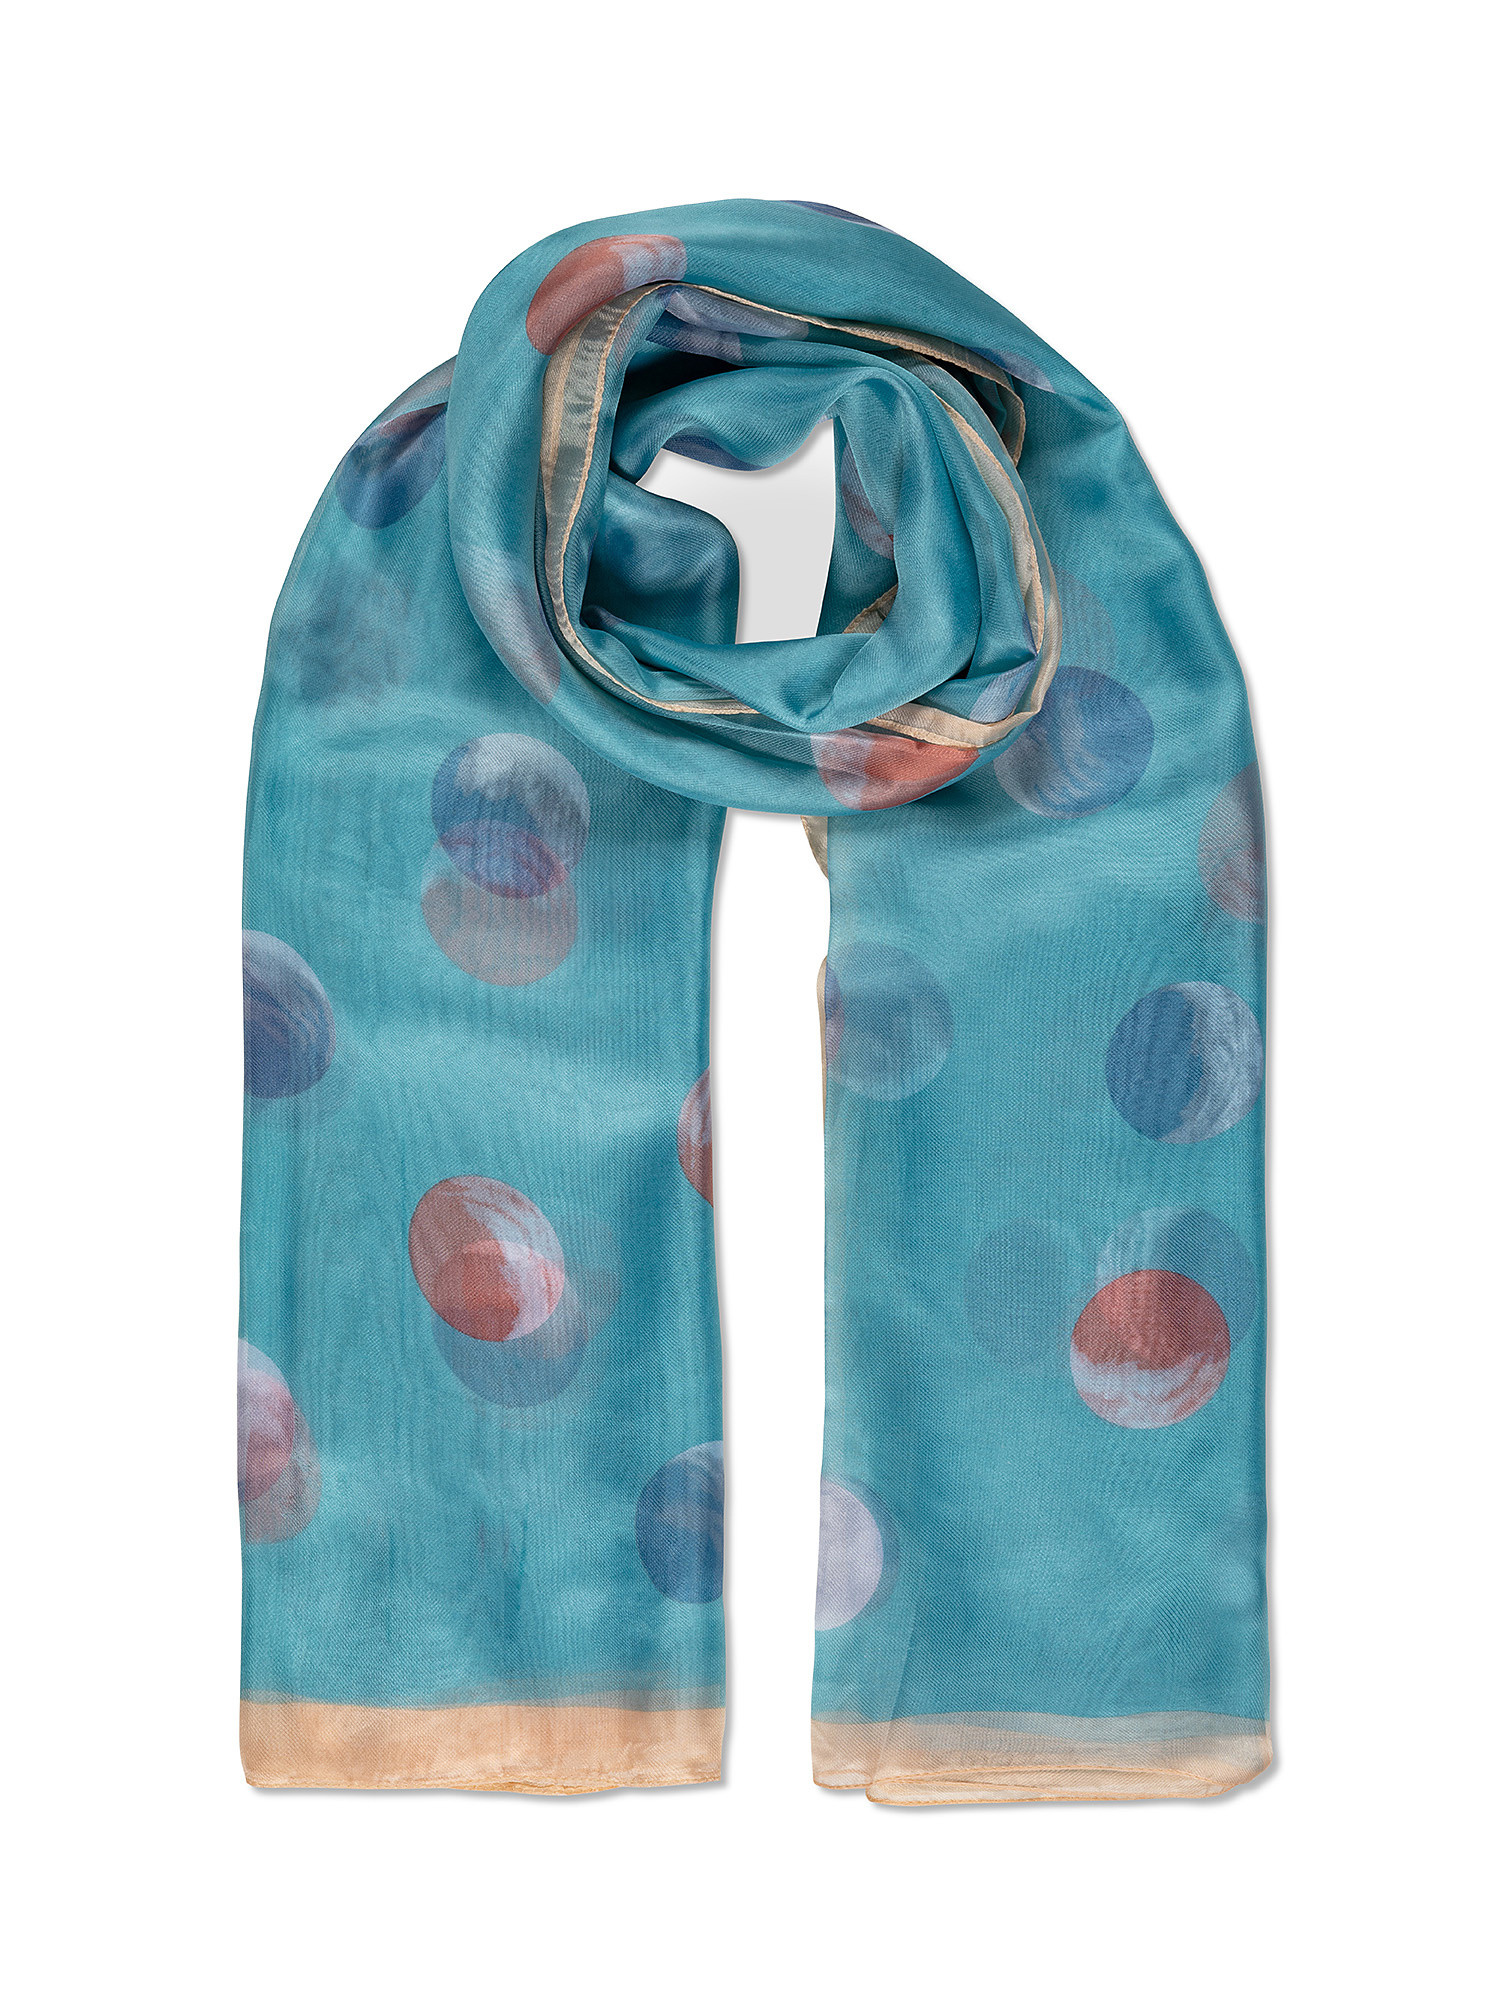 Koan - Scarf with bubble print, Light Blue, large image number 0